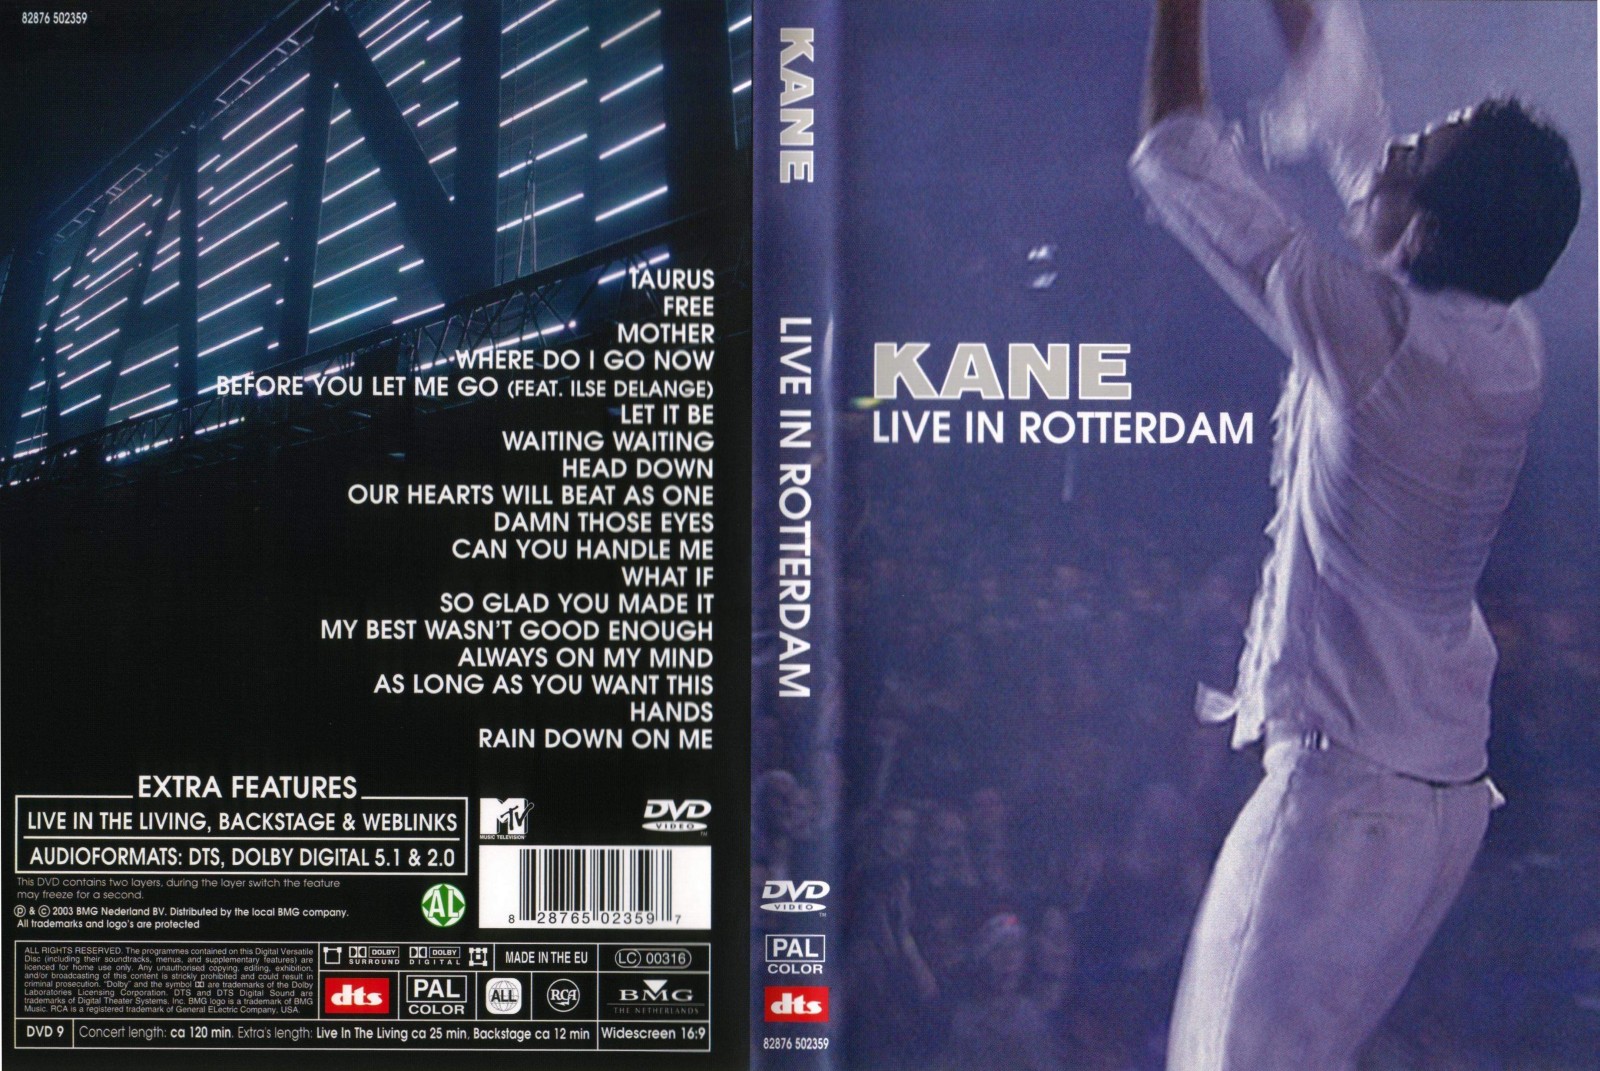 Jaquette DVD Kane live in rotterdam